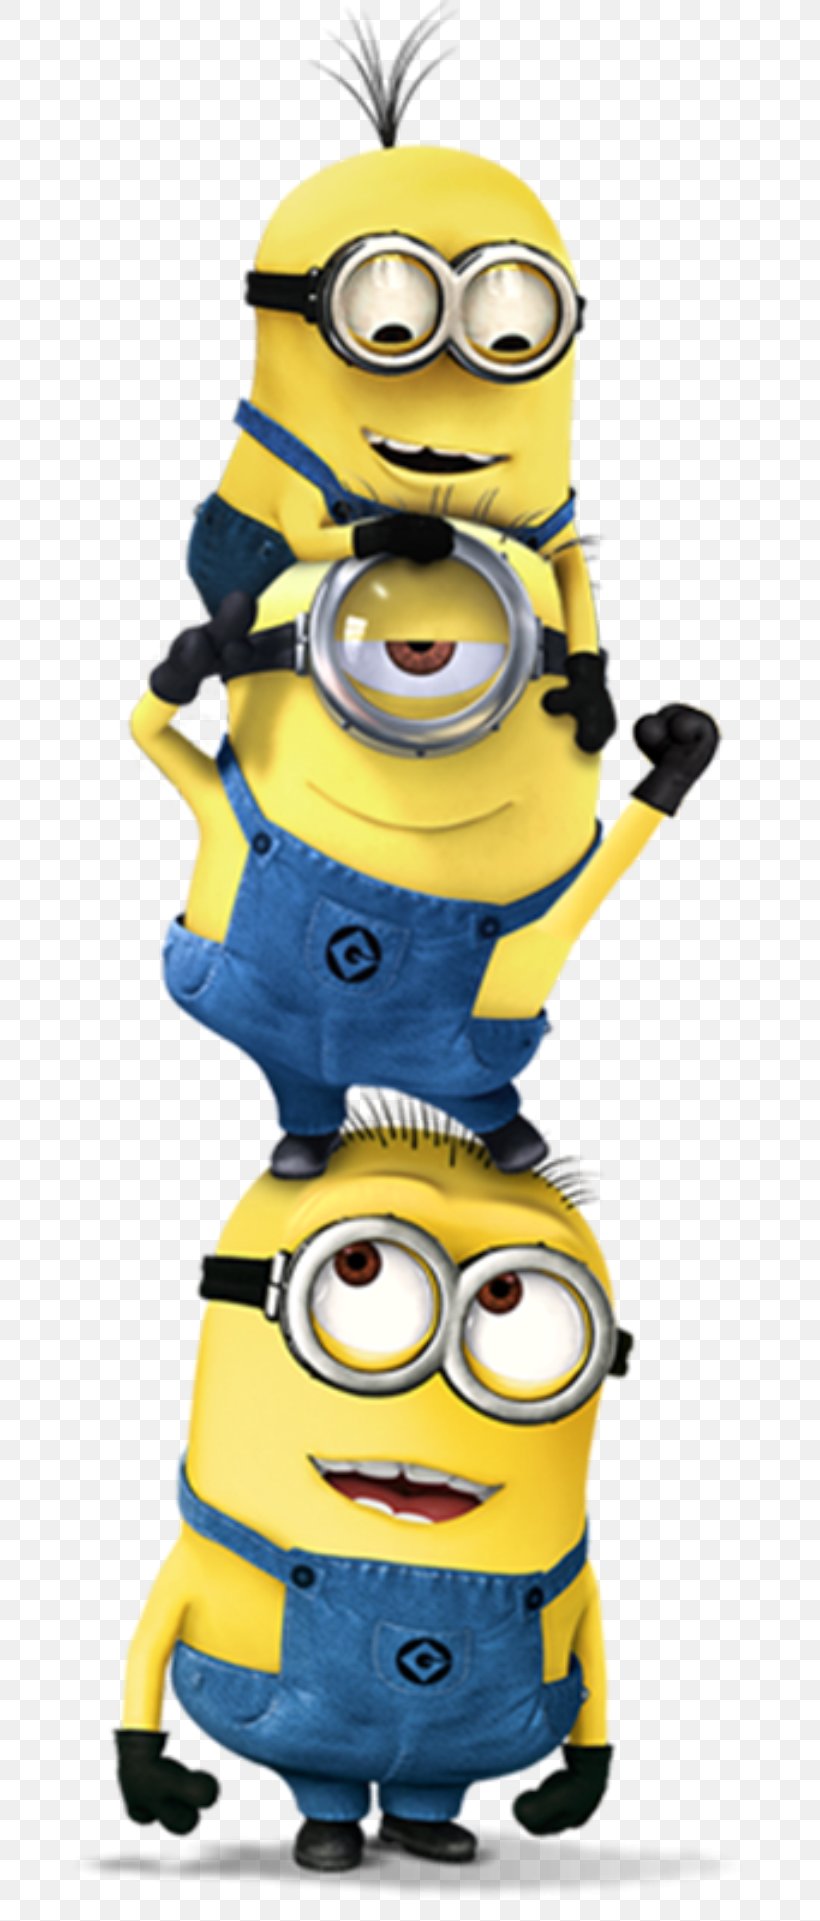 Kevin The Minion Dave The Minion Stuart The Minion Tim The Minion Minions, PNG, 687x1921px, Kevin The Minion, Dave The Minion, Despicable Me, Despicable Me 2, Despicable Me 3 Download Free